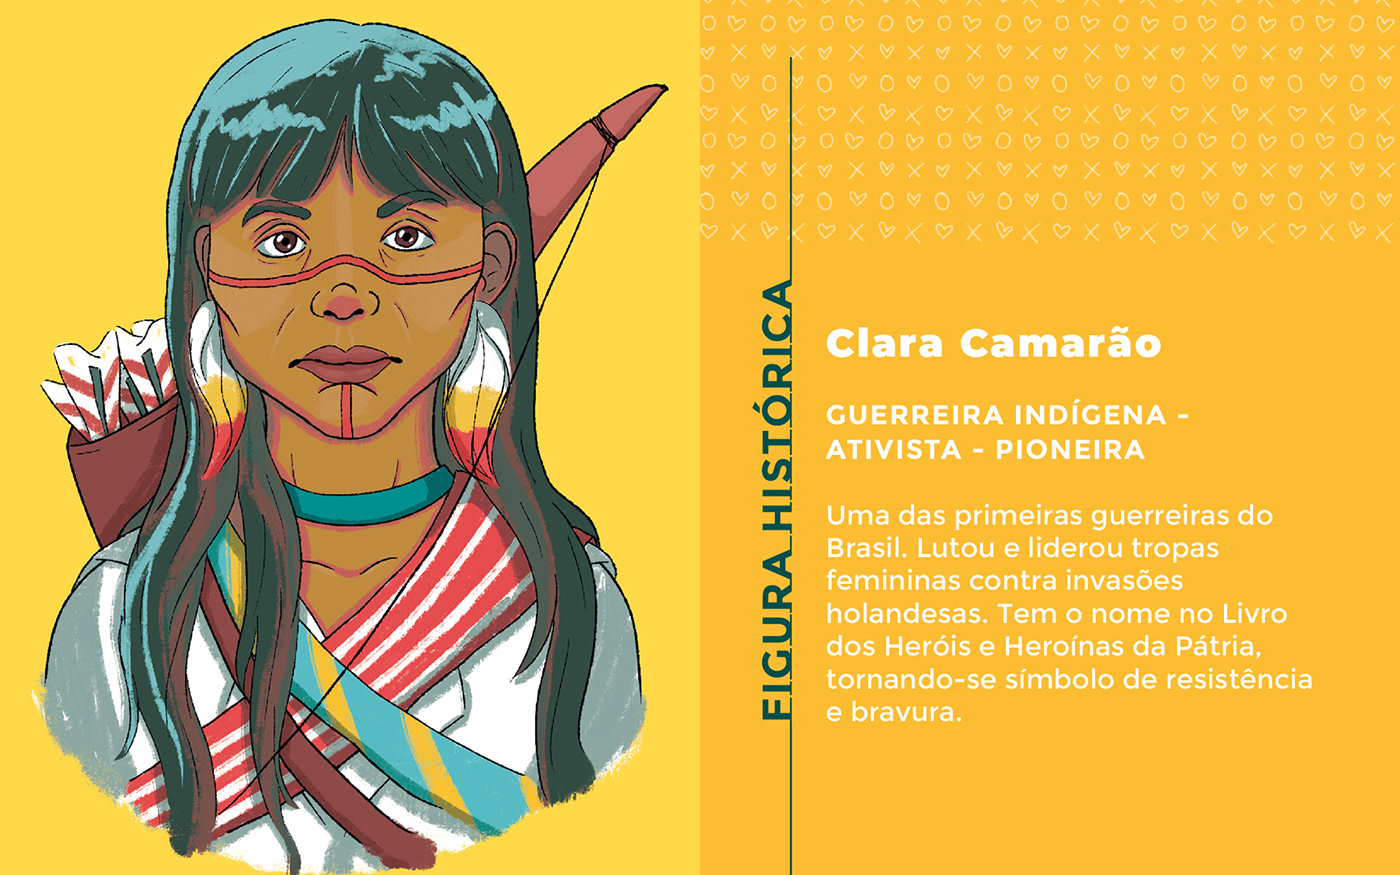 An illustrated portrait of  Clara Camarão, a historical indigenous warrior from Brasil.

